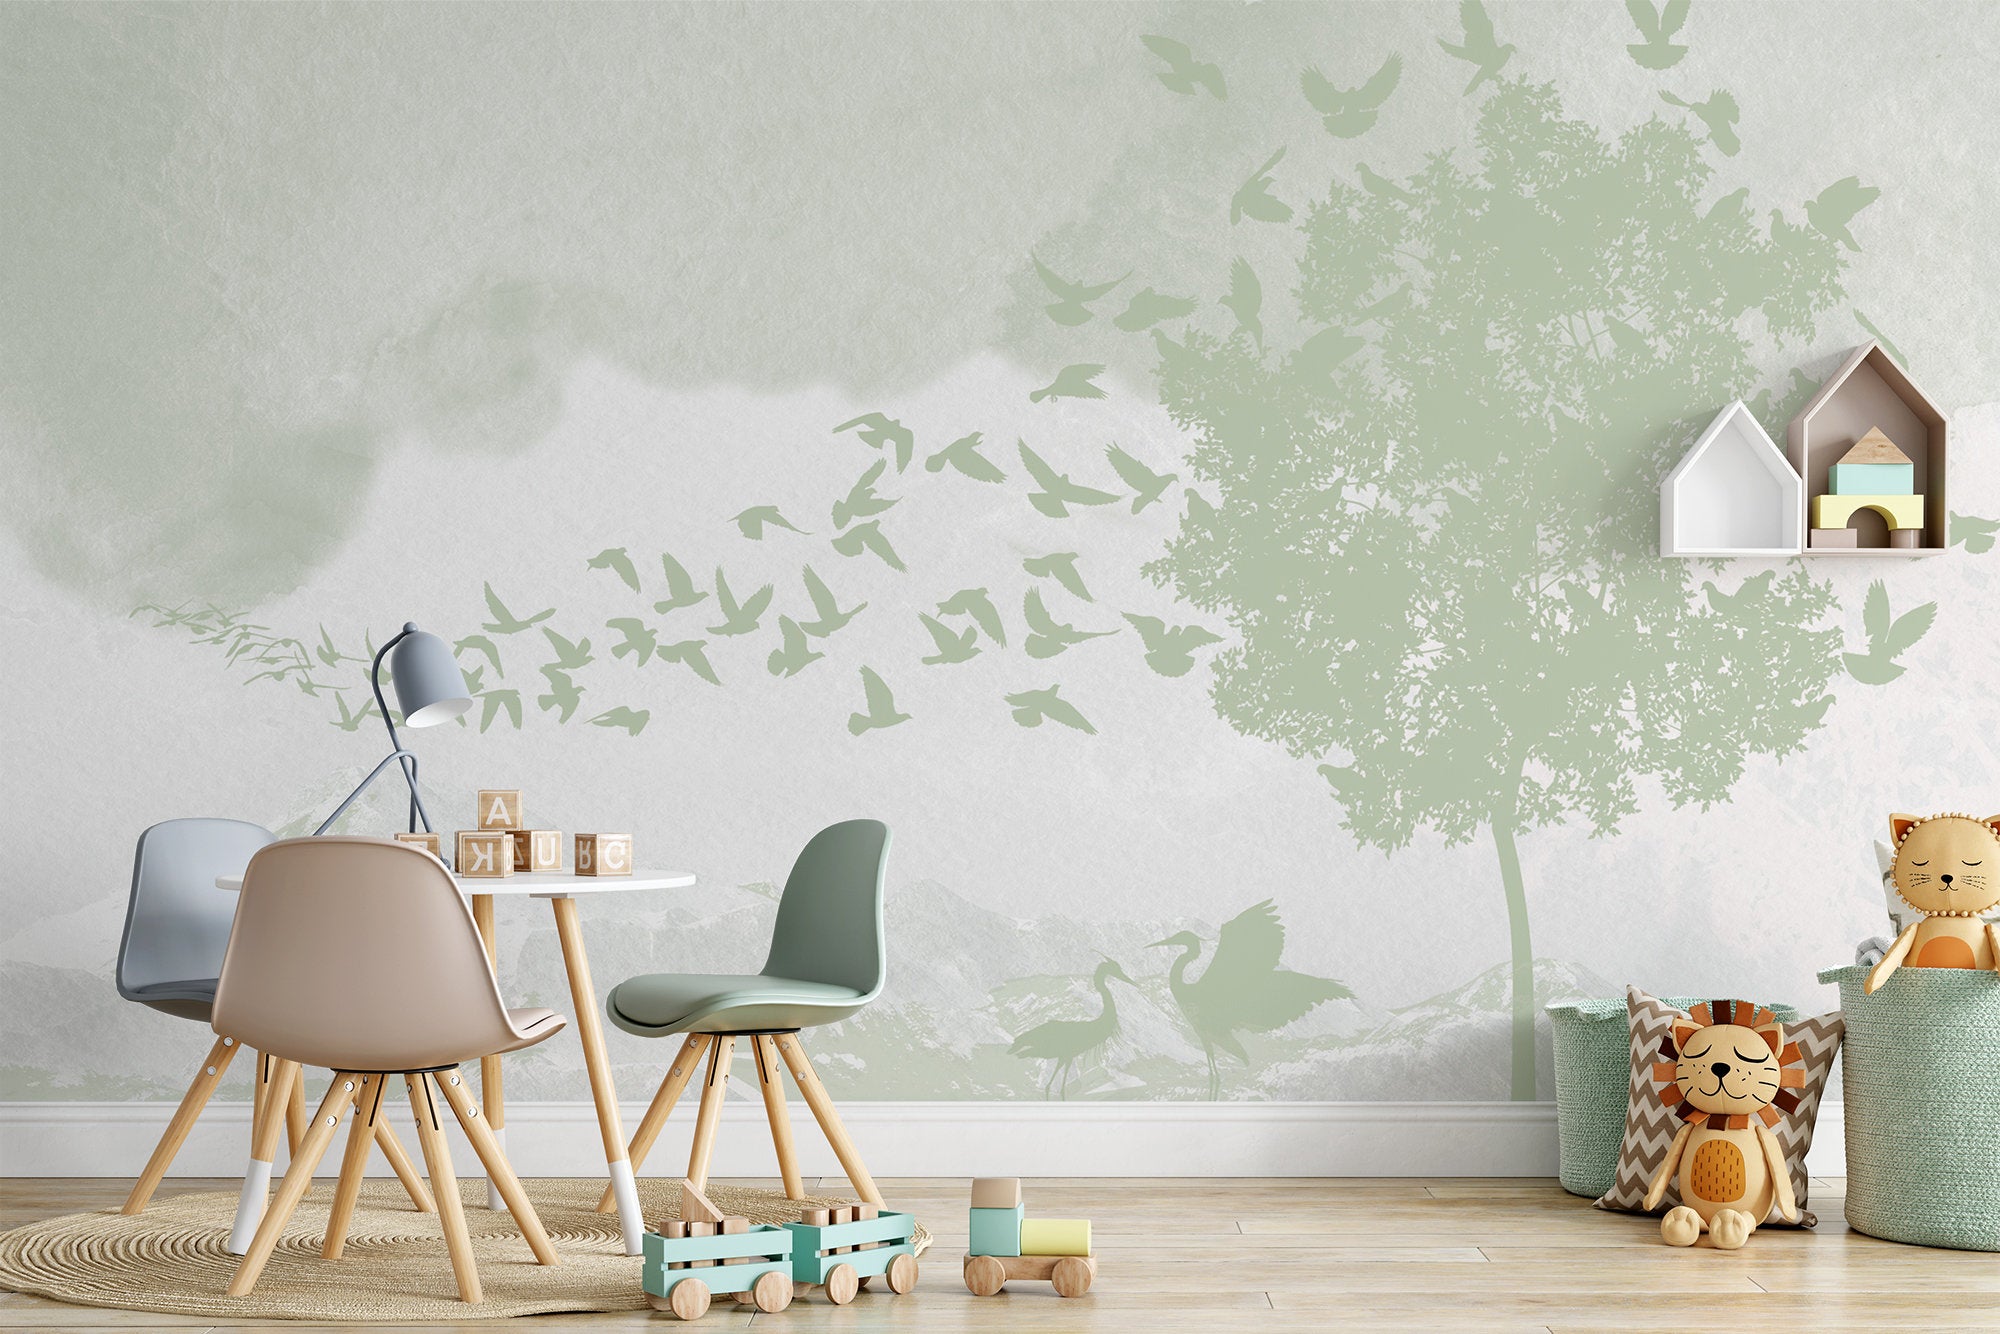 Abstract Tree Herd of Birds Snowy Mountains Clouds Wallpaper Self Adhesive Peel and Stick Wall Sticker Wall Decoration Removable